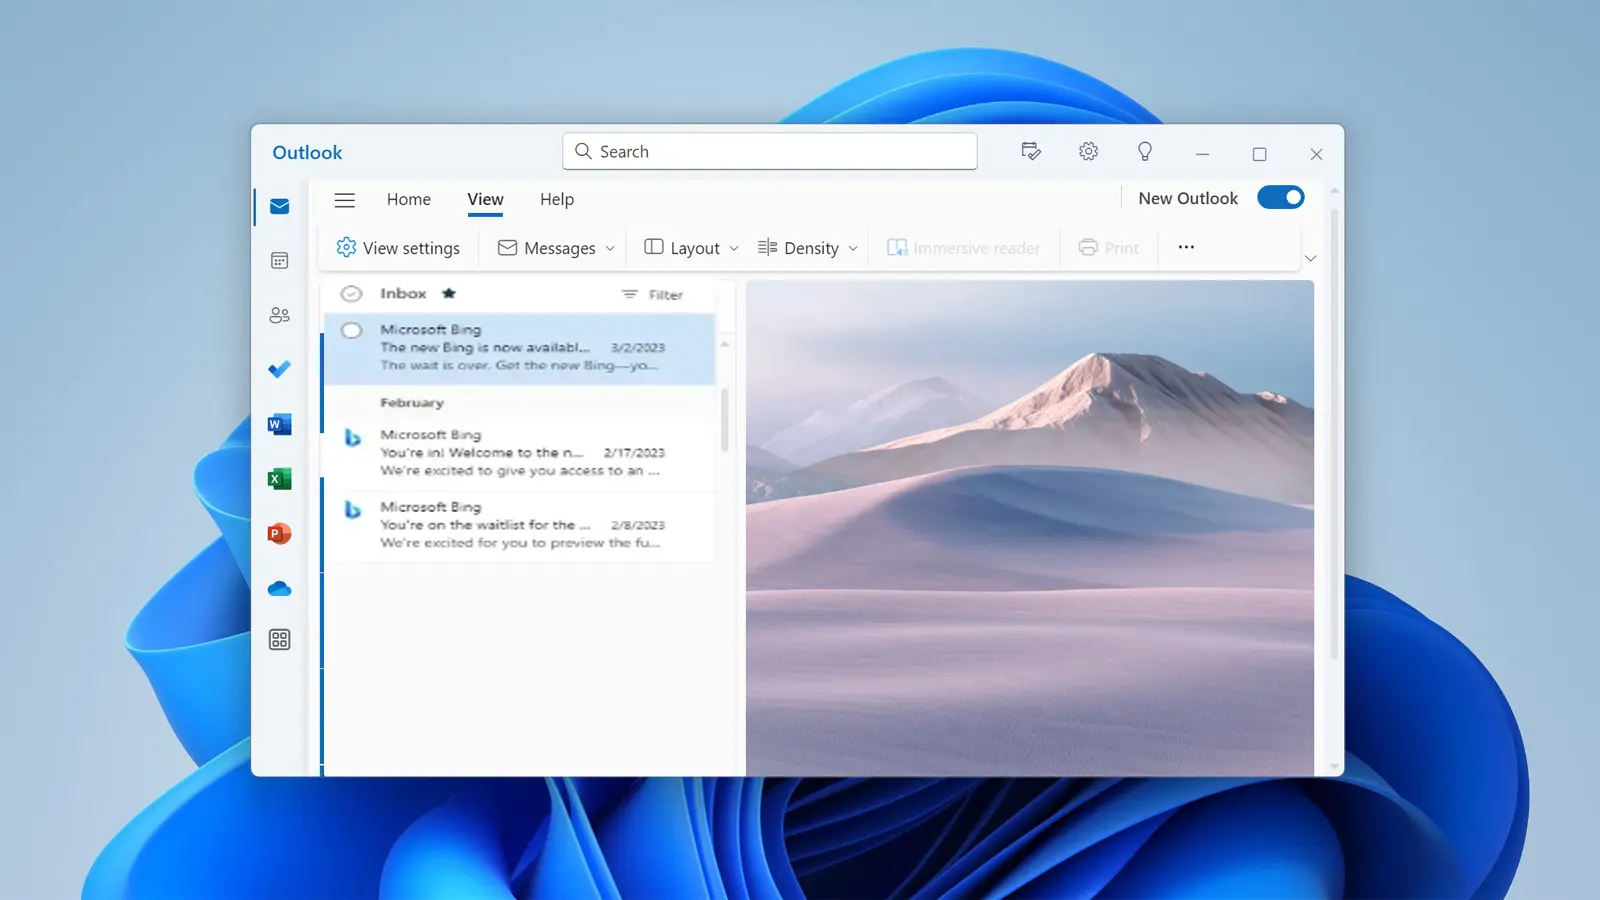 New Outlook for Windows